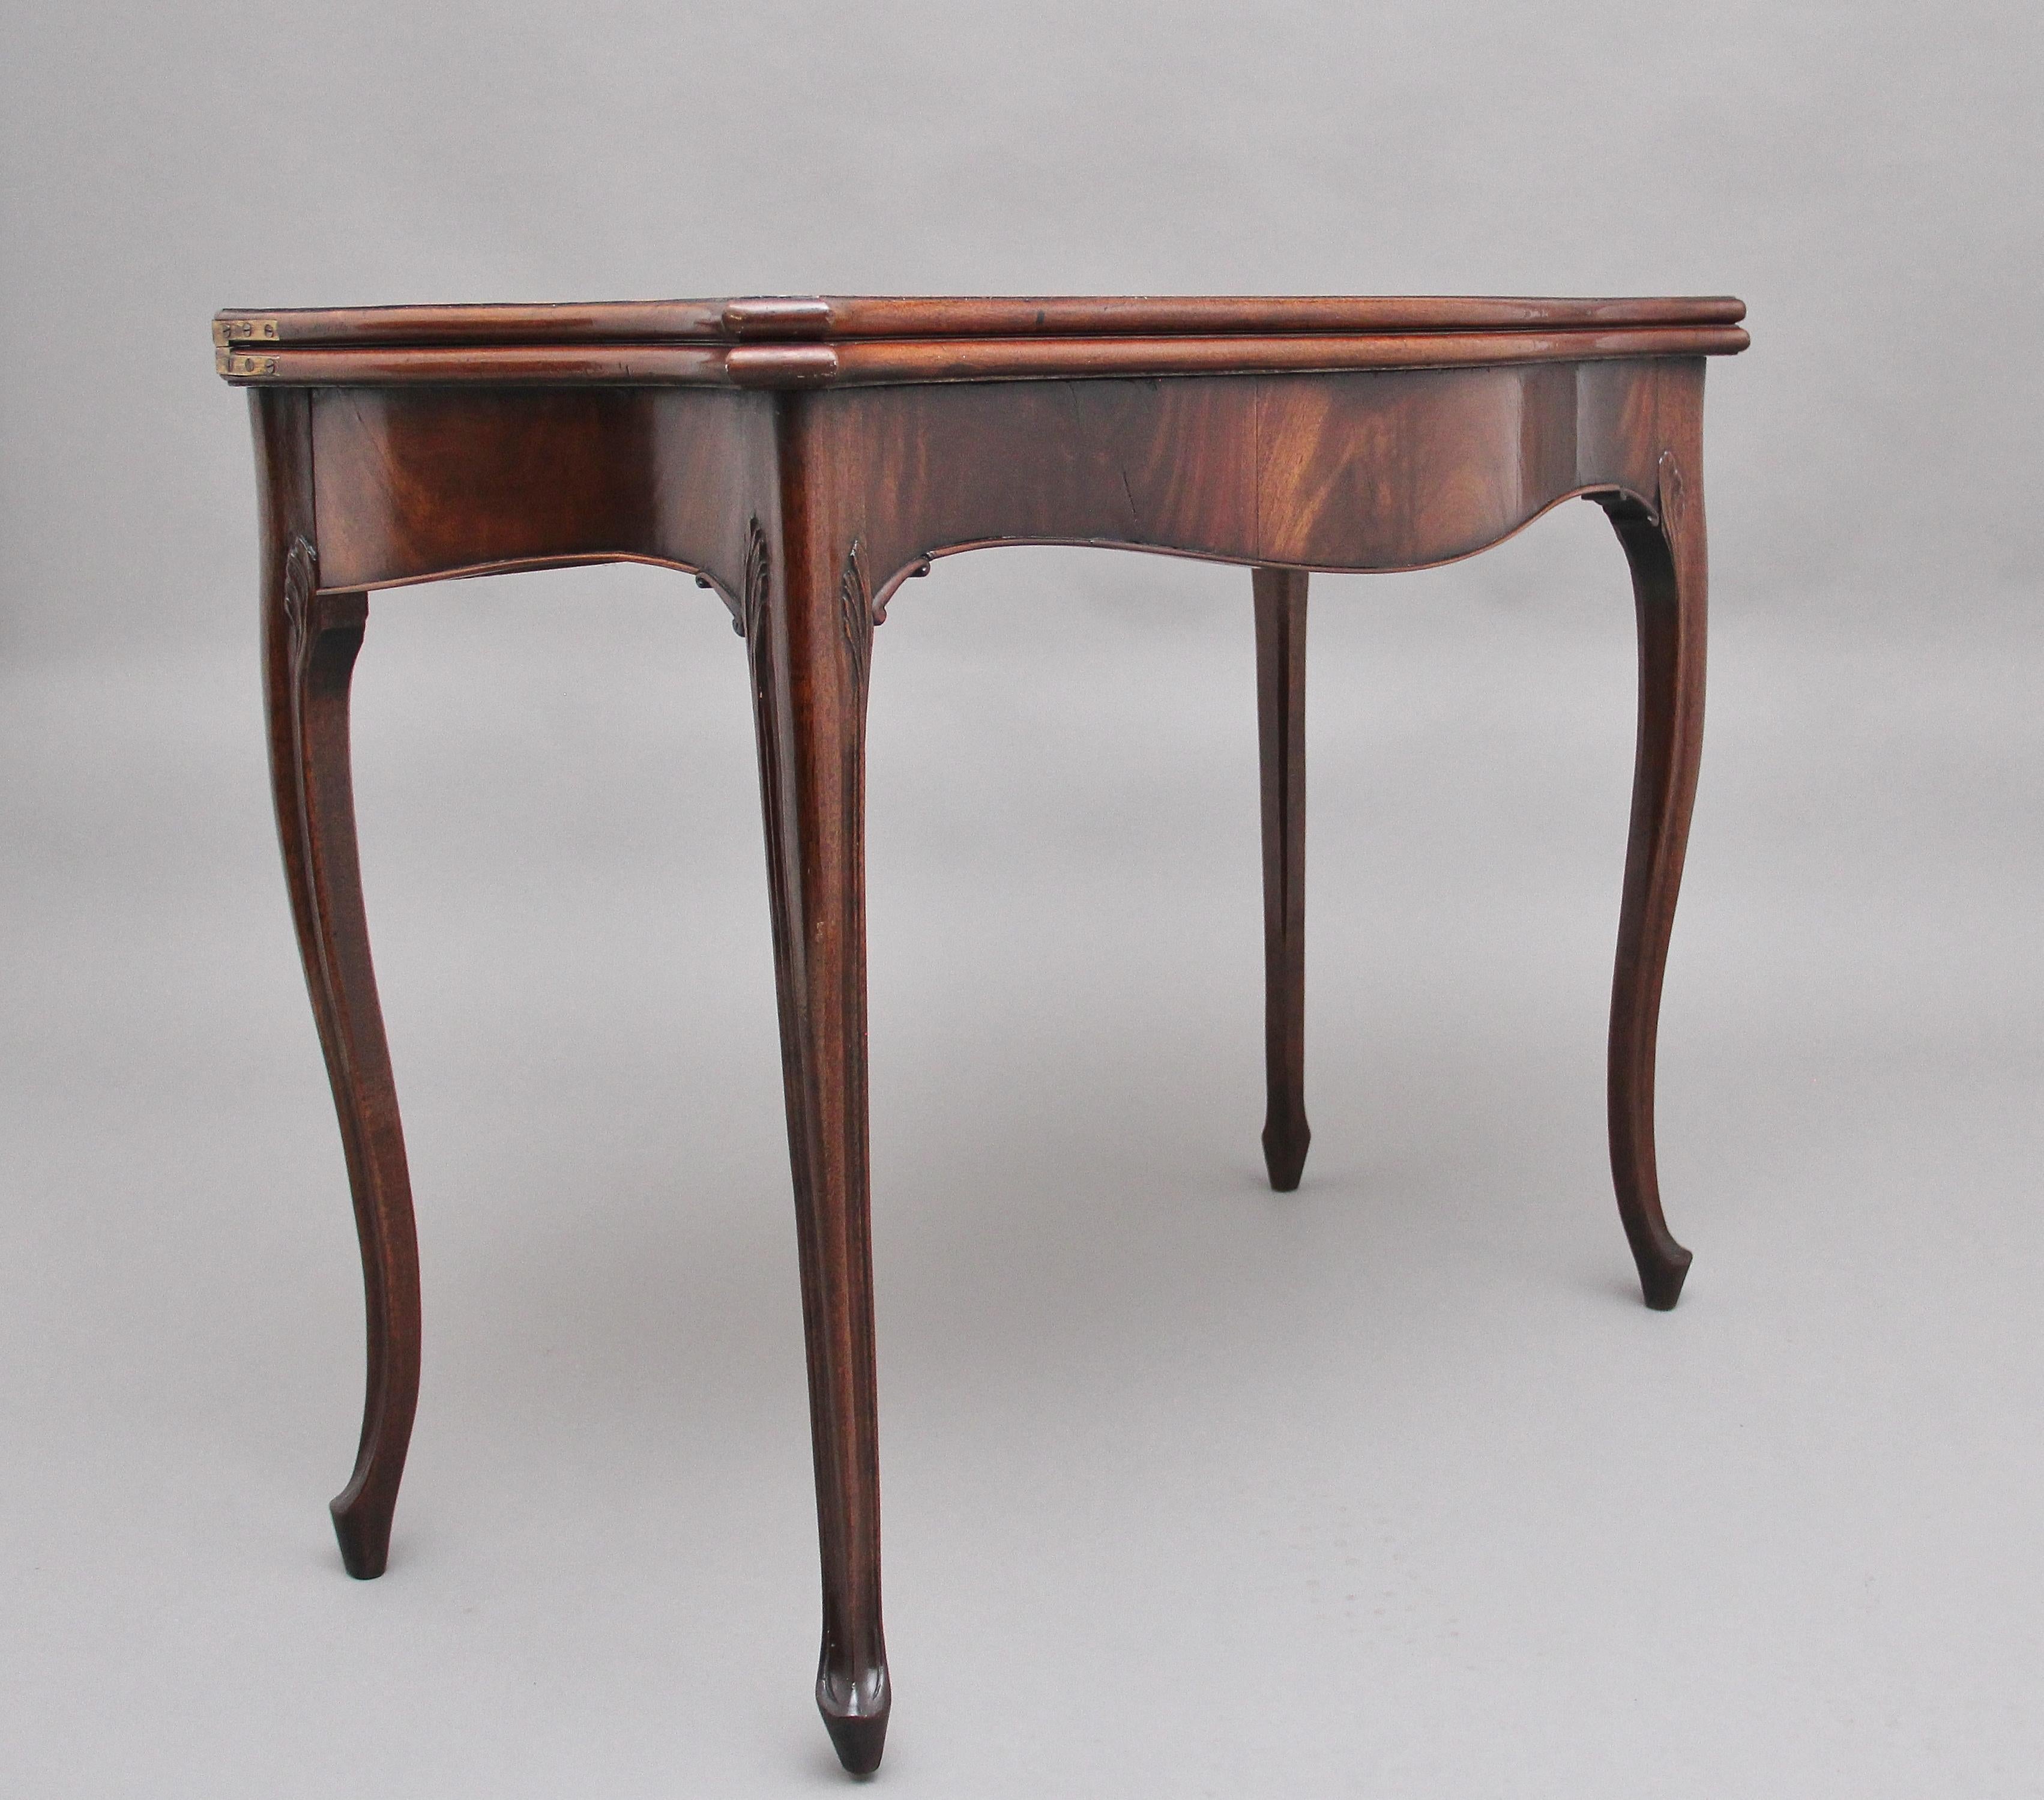 Early 19th century mahogany card table, the moulded edge shaped top opening to reveal a green baize playing surface, the shaped frieze below with carved leaf decoration at each side, supported on slender cabriole legs. Circa 1810.